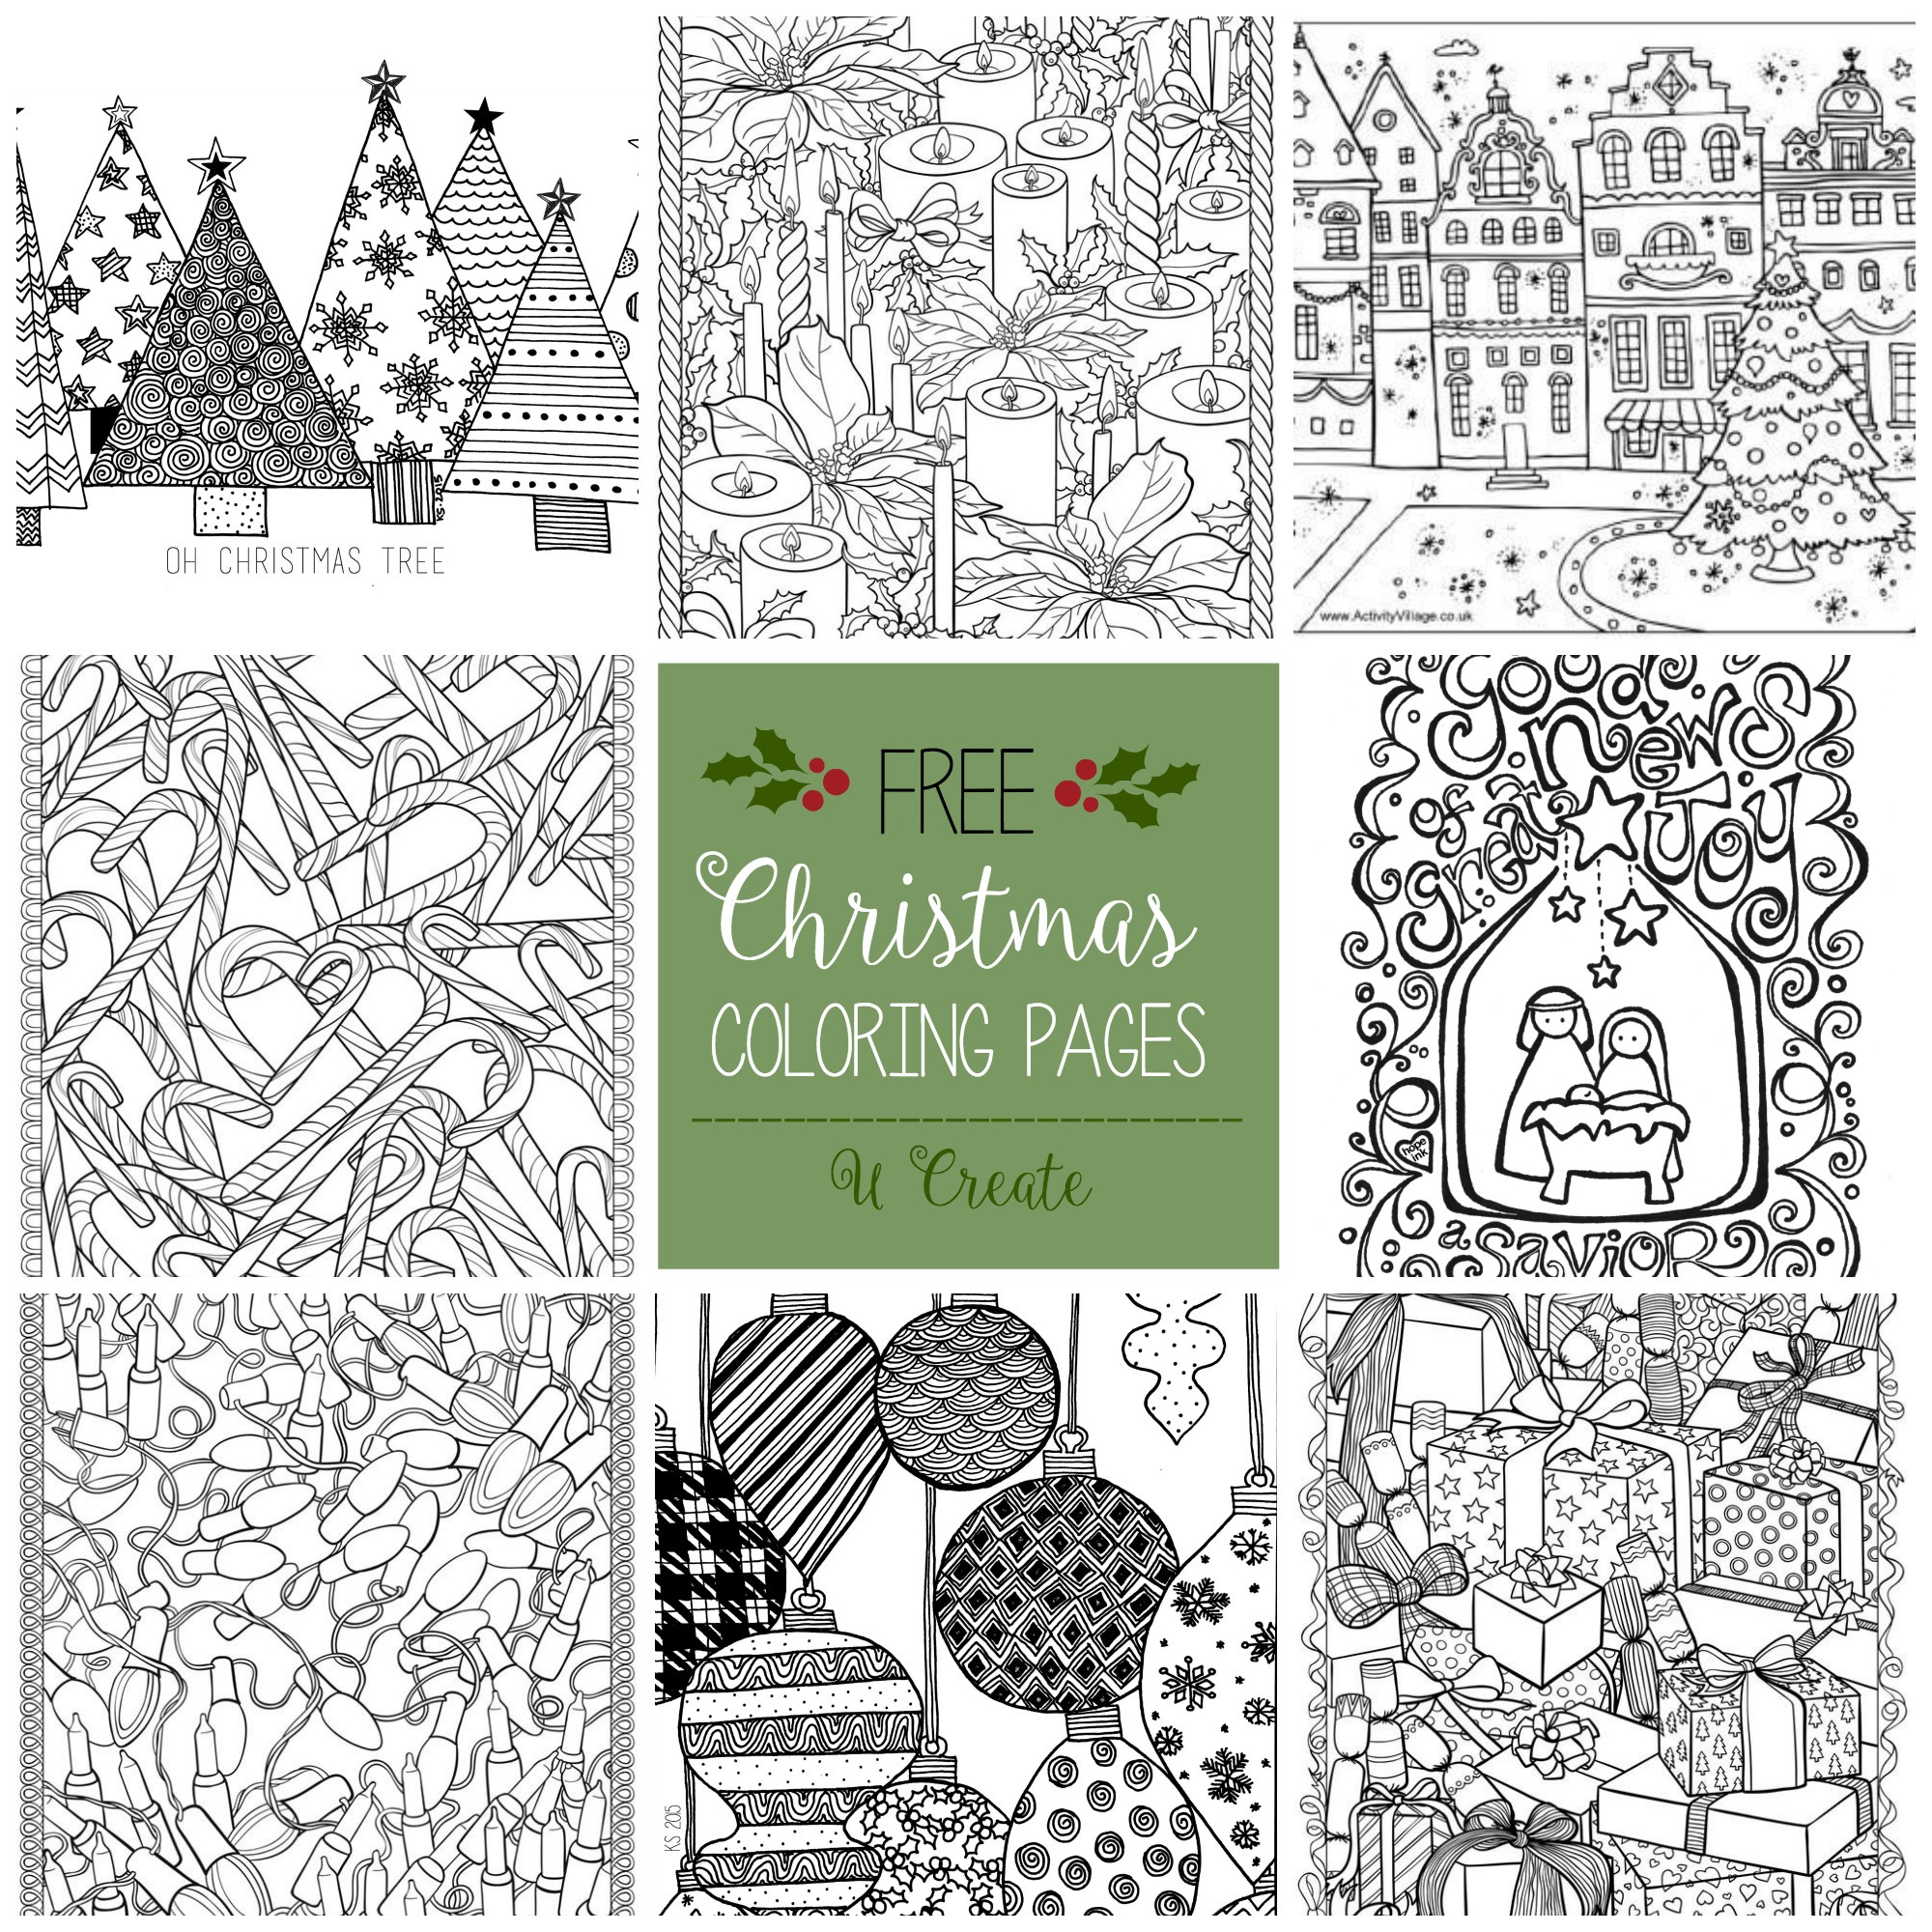 https://www.burlapandblue.com/wp-content/uploads/2020/11/Adult-Christmas-Coloring-Pages.jpg